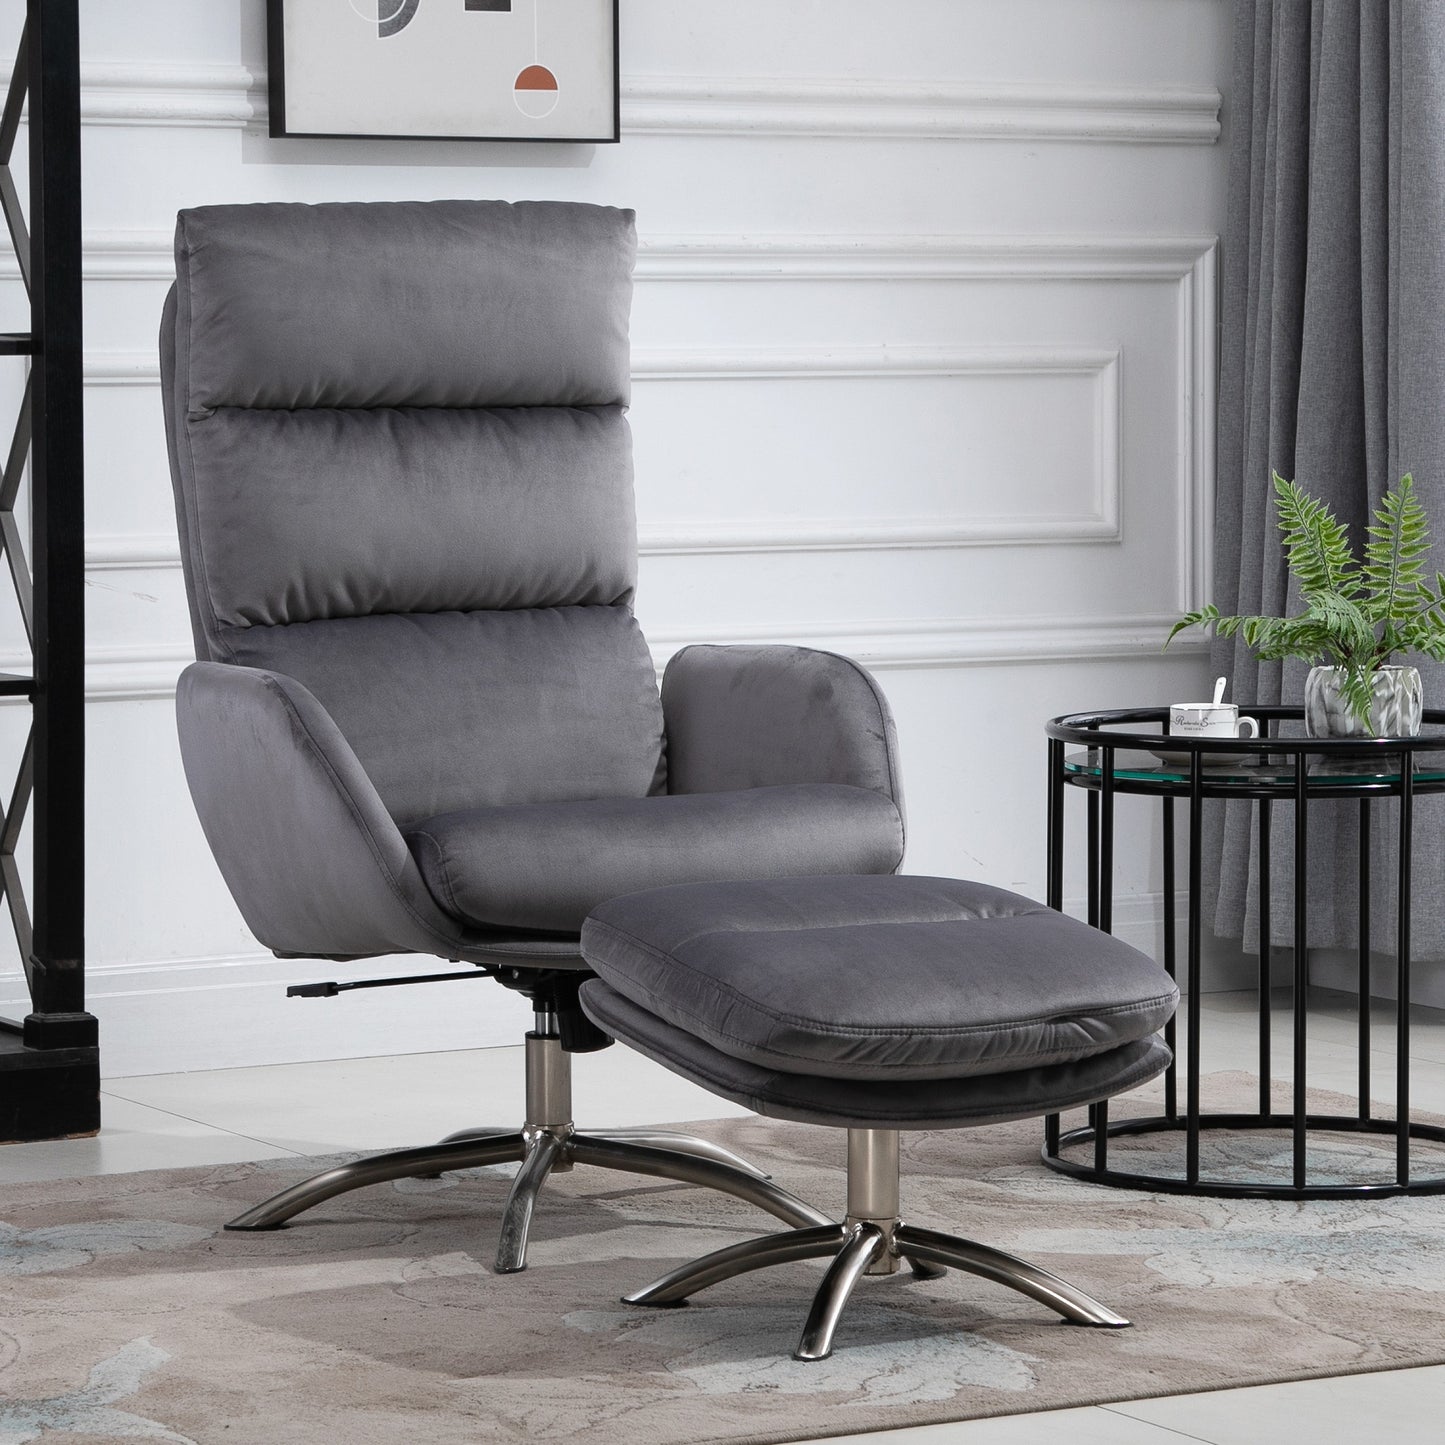 HOMCOM 2 Pieces Leisure Chair and Ottoman with Sponge Padding Metal Base Home Office